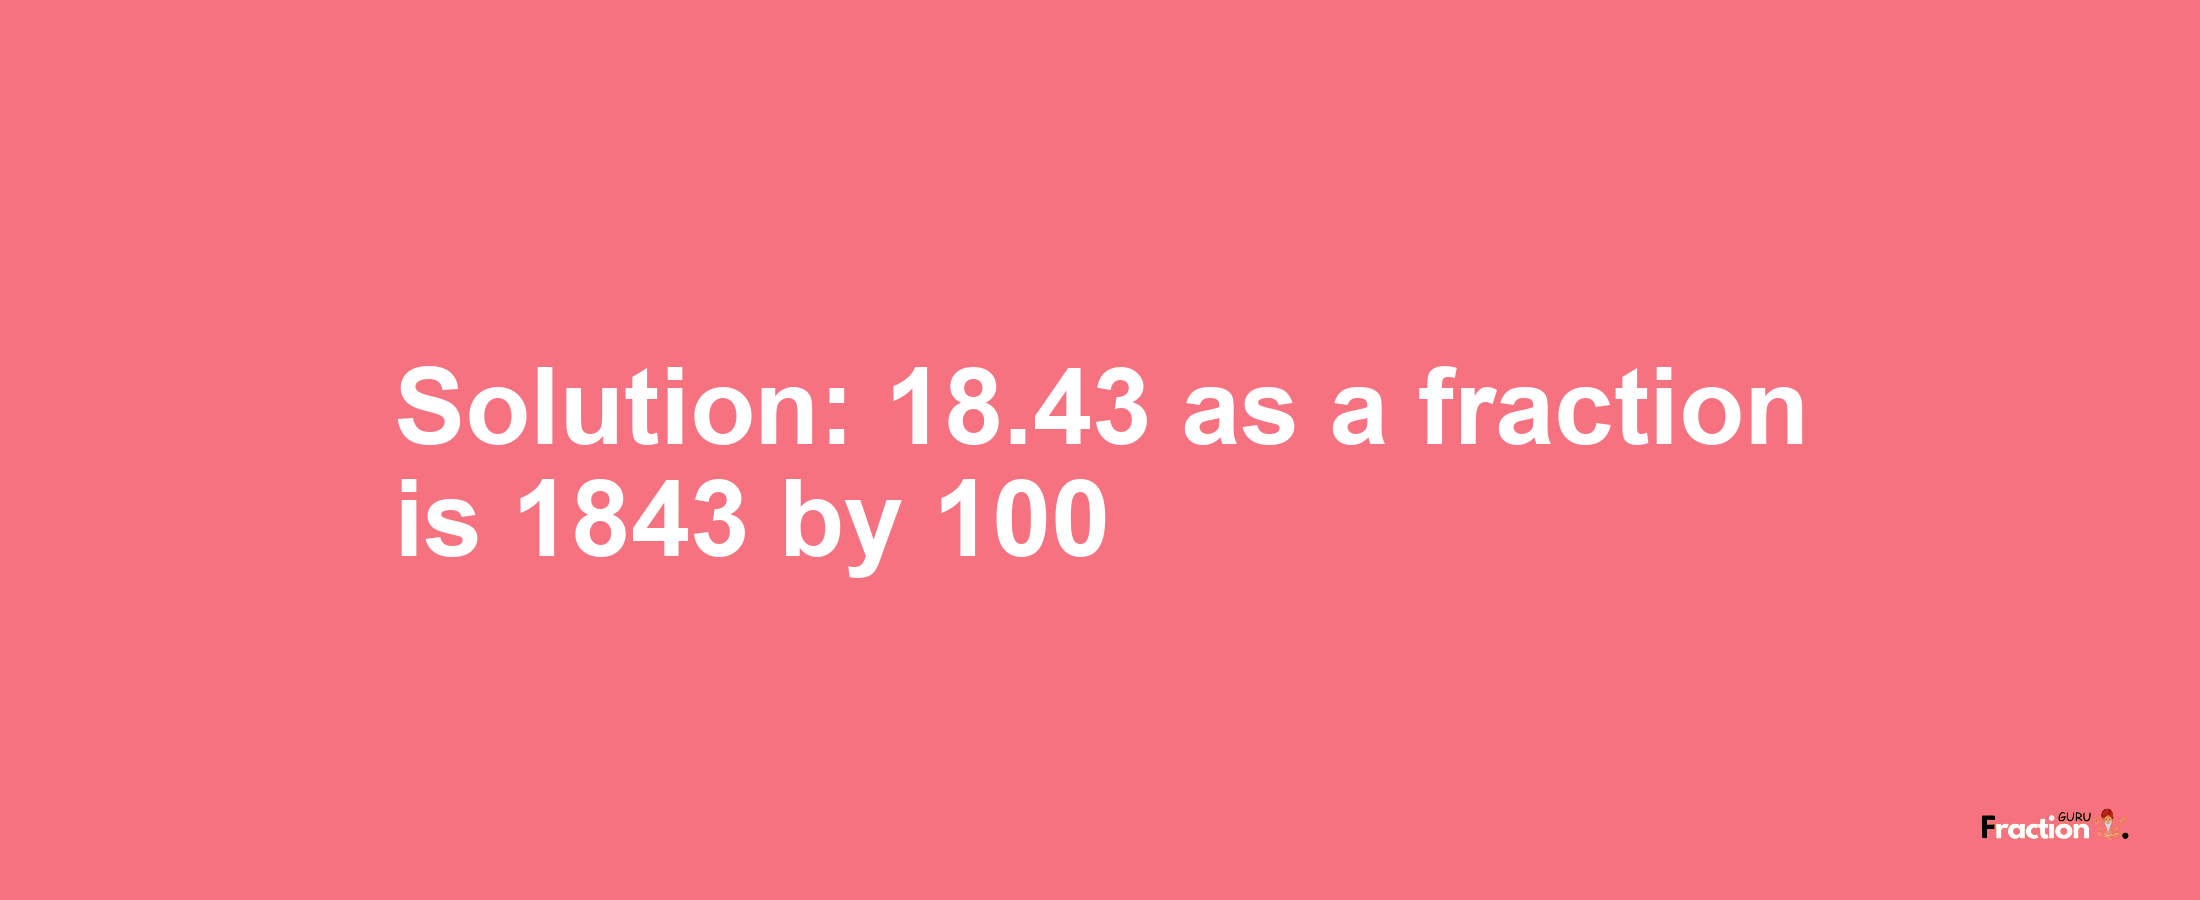 Solution:18.43 as a fraction is 1843/100